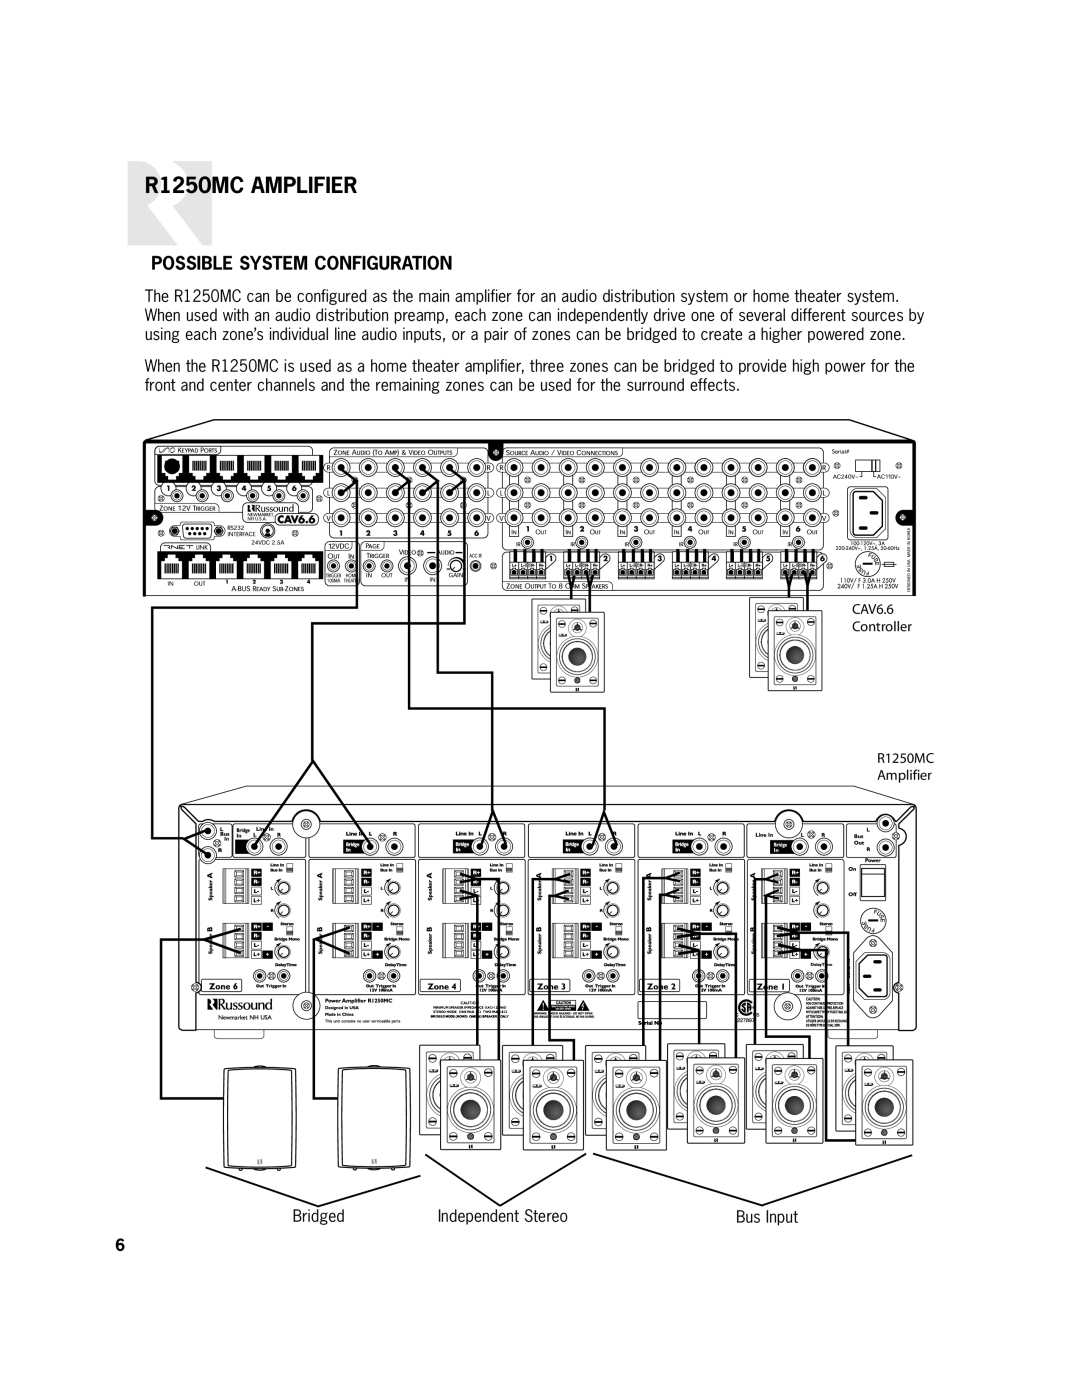 Russound user manual Possible System Configuration, R1250MC AMPLIFIER 